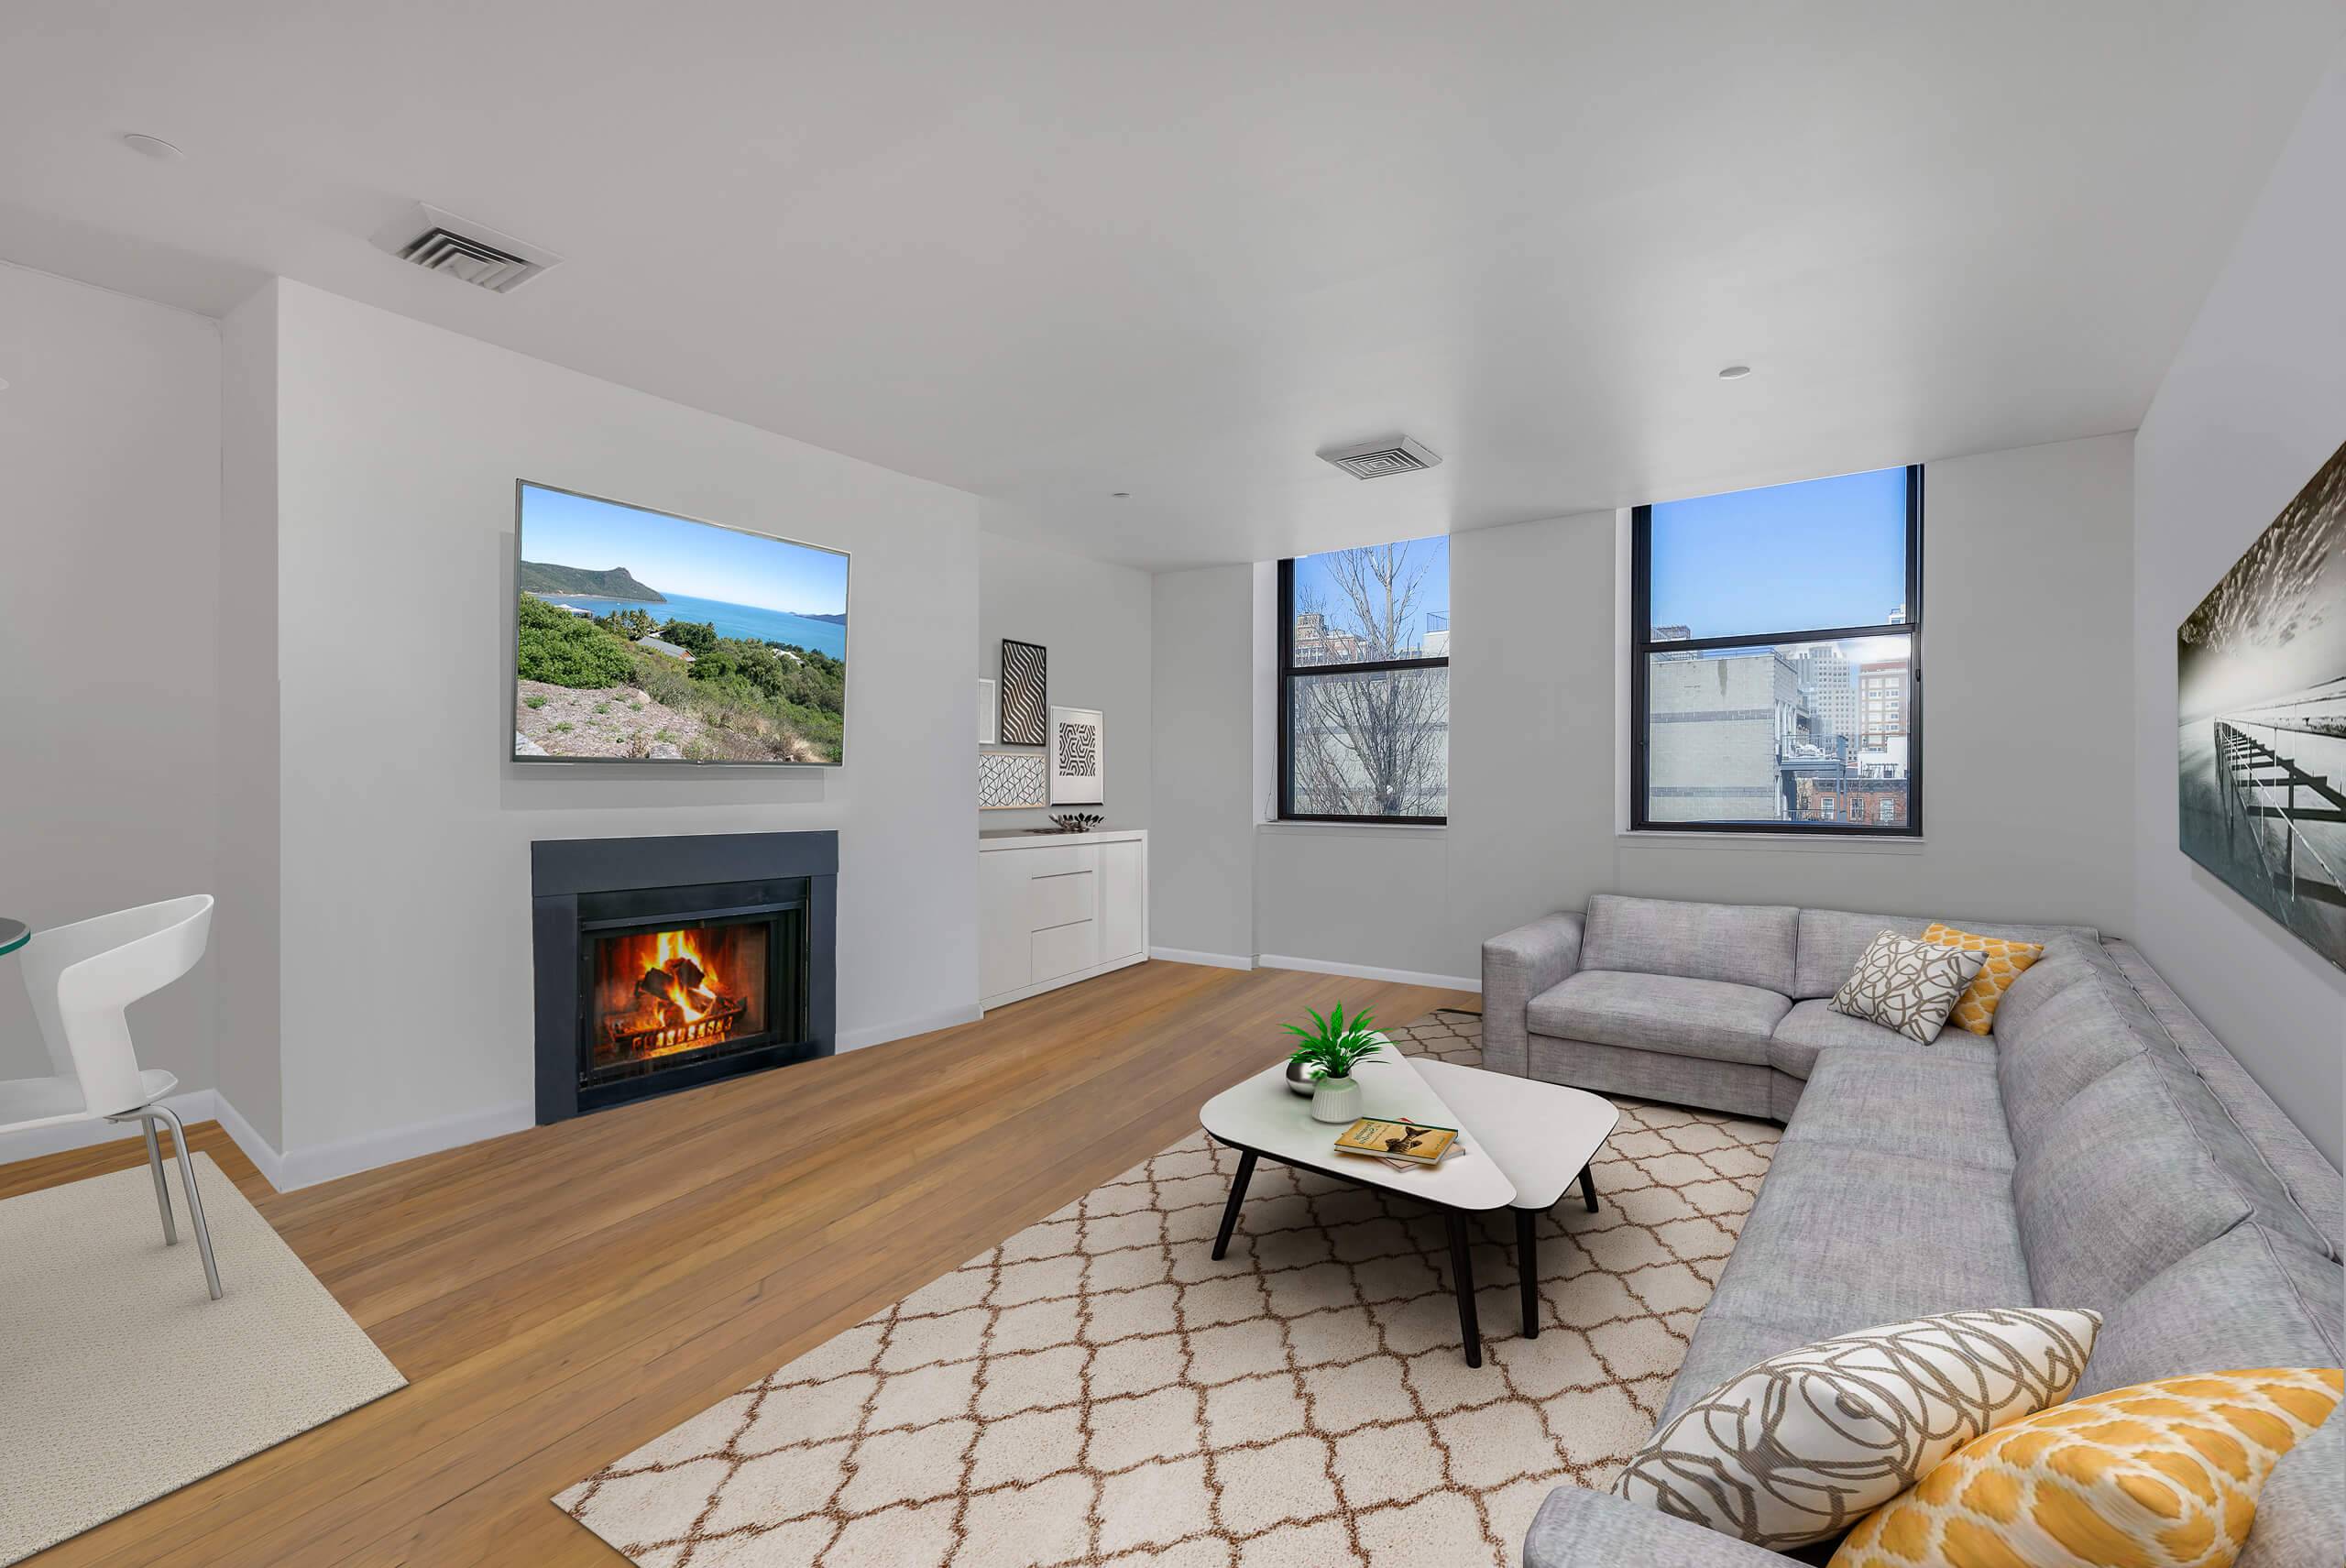 88 Wyckoff Street is a rarely available well established Boerum Hill luxury 2 bedroom pre war condo in stunning building that was originally built as the main store for the ...